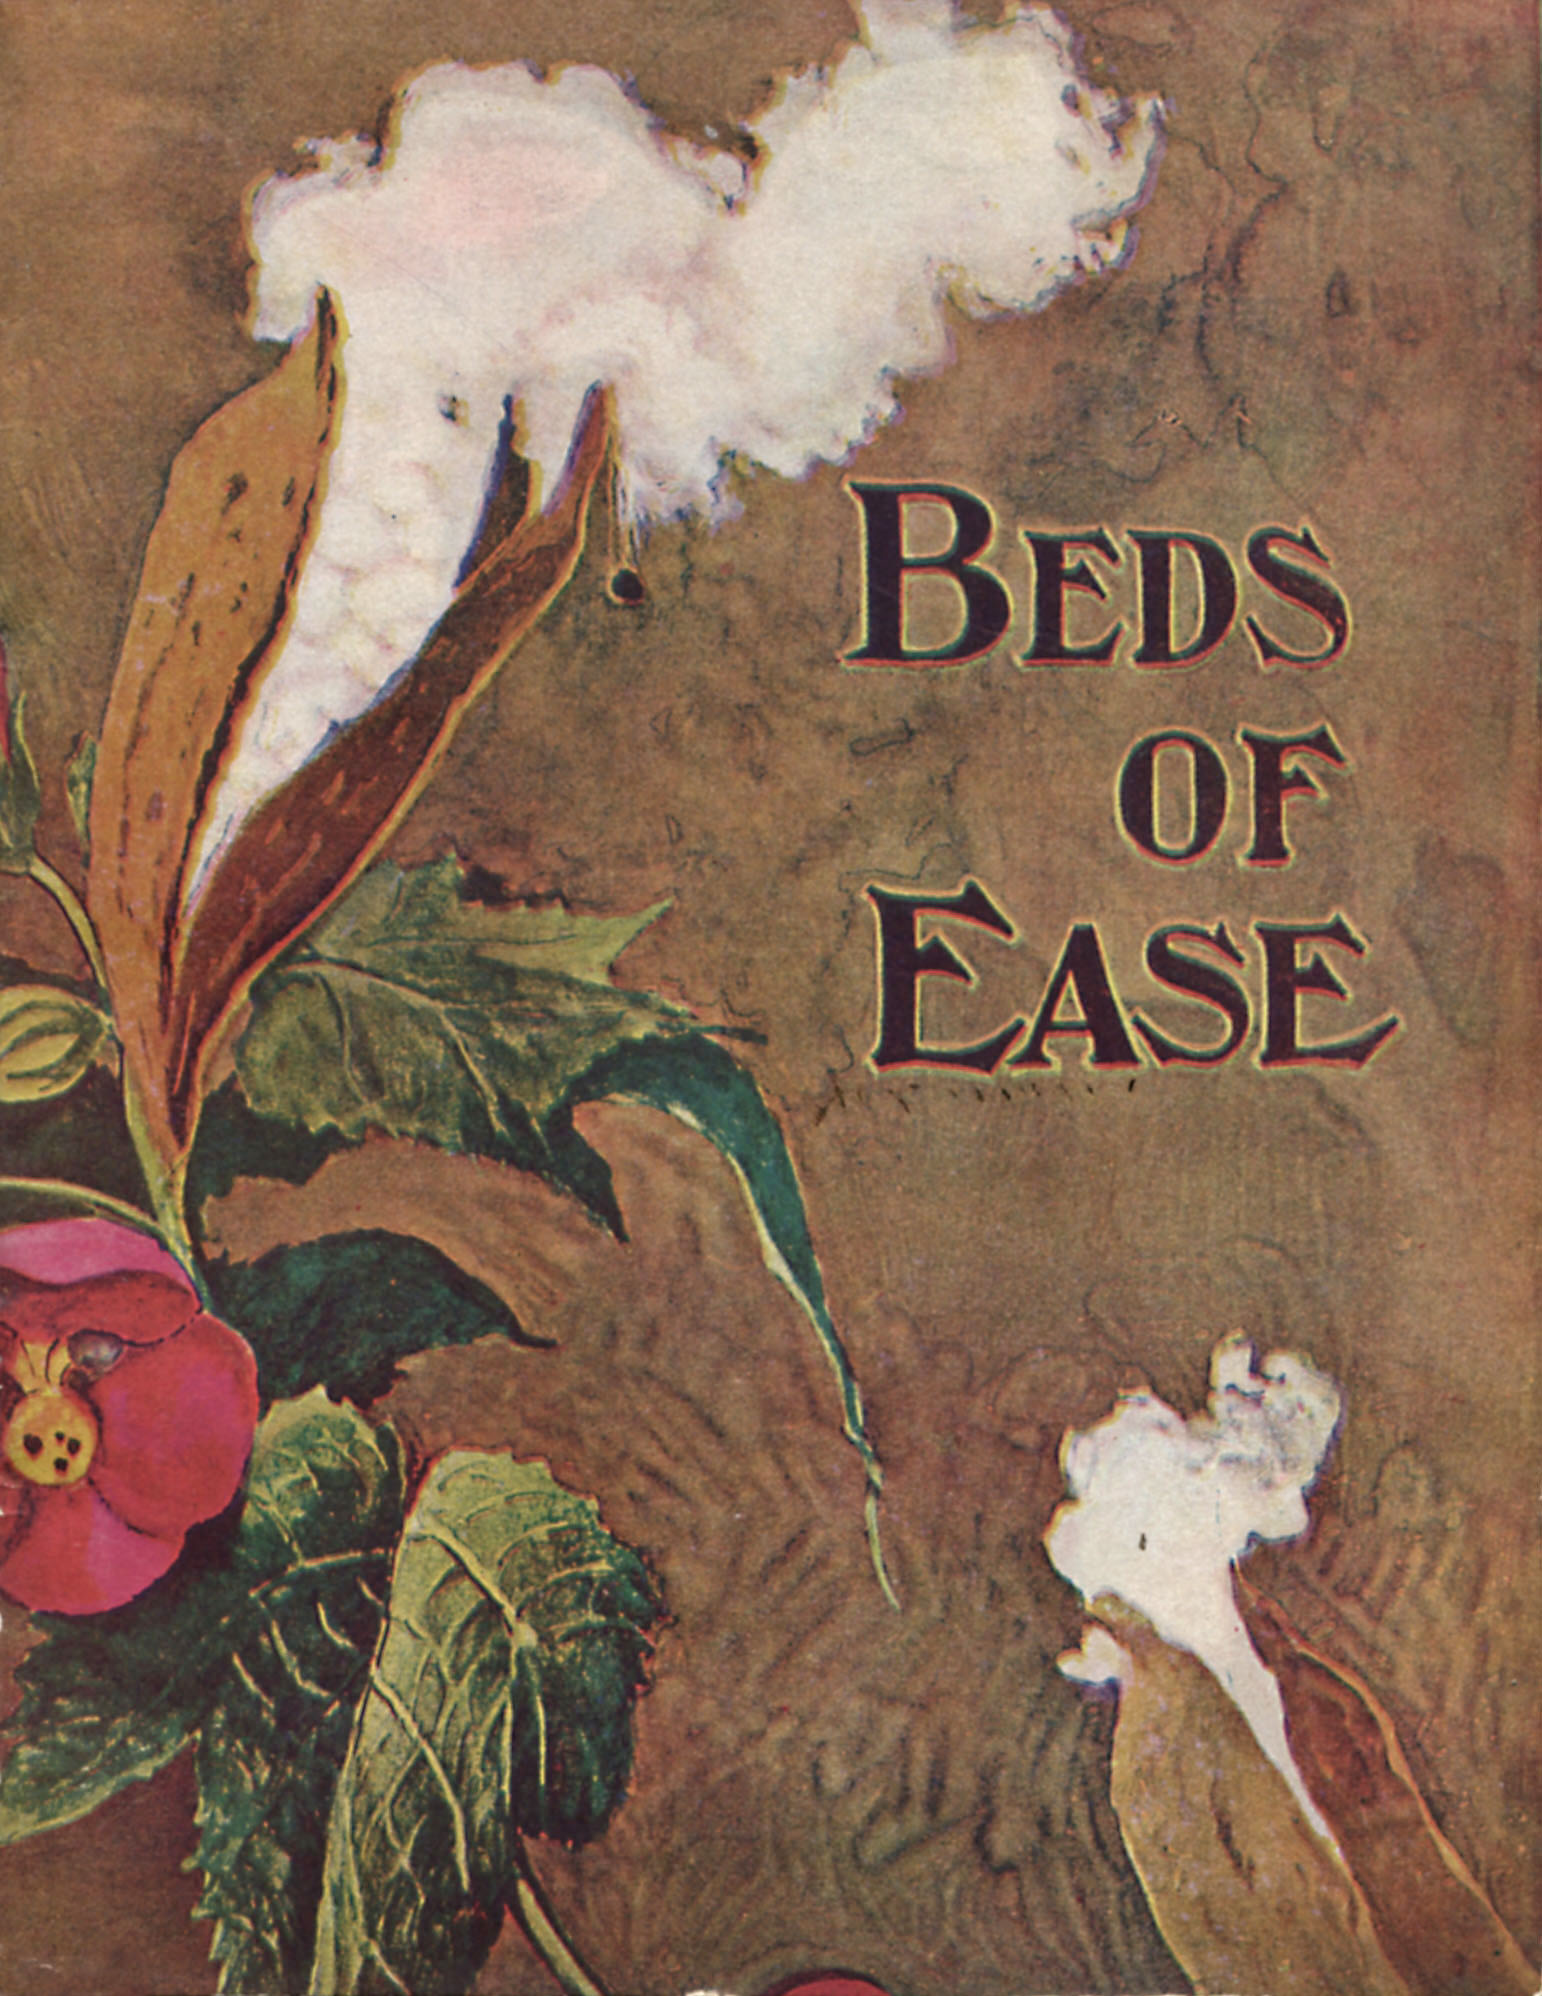 Beds of Ease- early mattress catalog cover